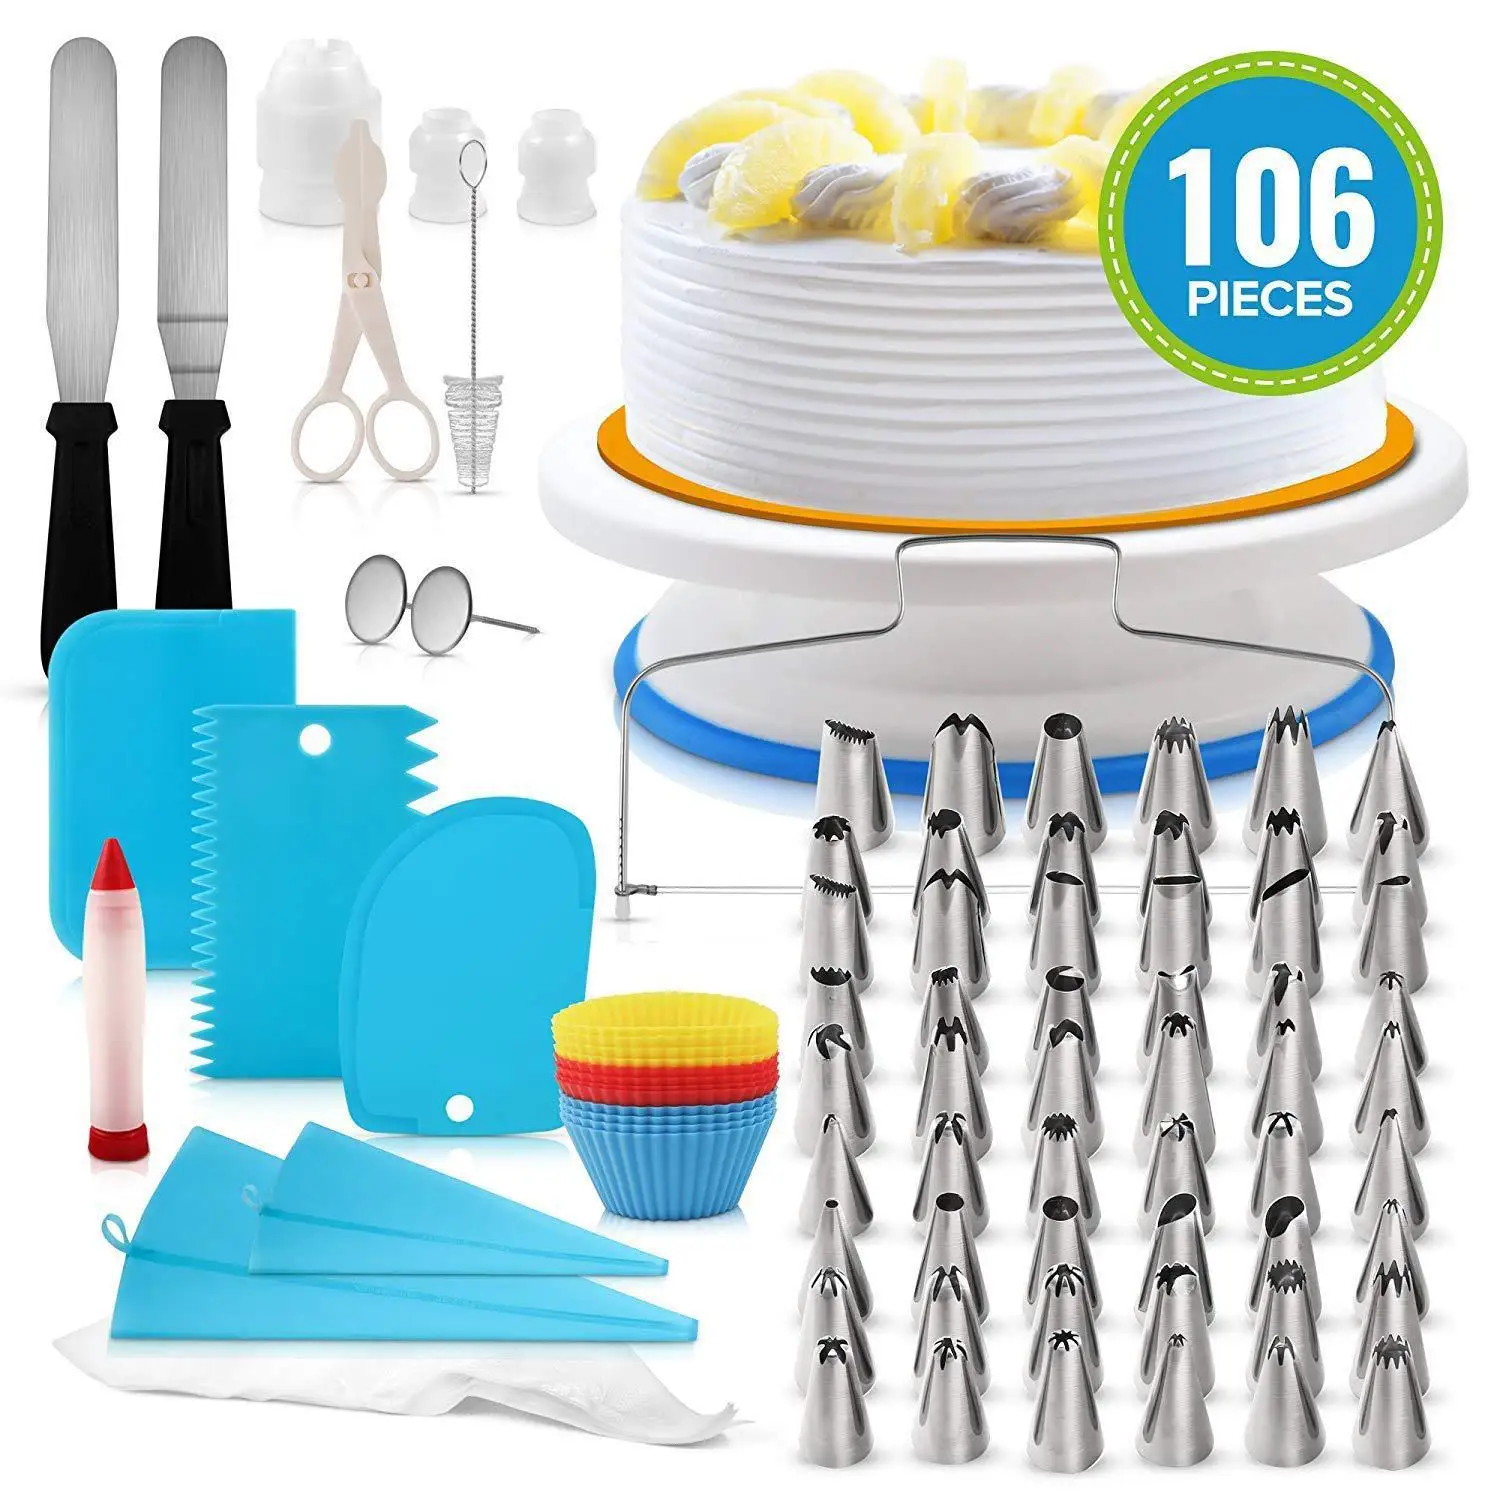 

106 Pcs Rolling Tray Stainless Steel Spatula Cake Decorating Tools Simple Eco Friendly Cake Tools Cocina Kitchen Items Ec50hb